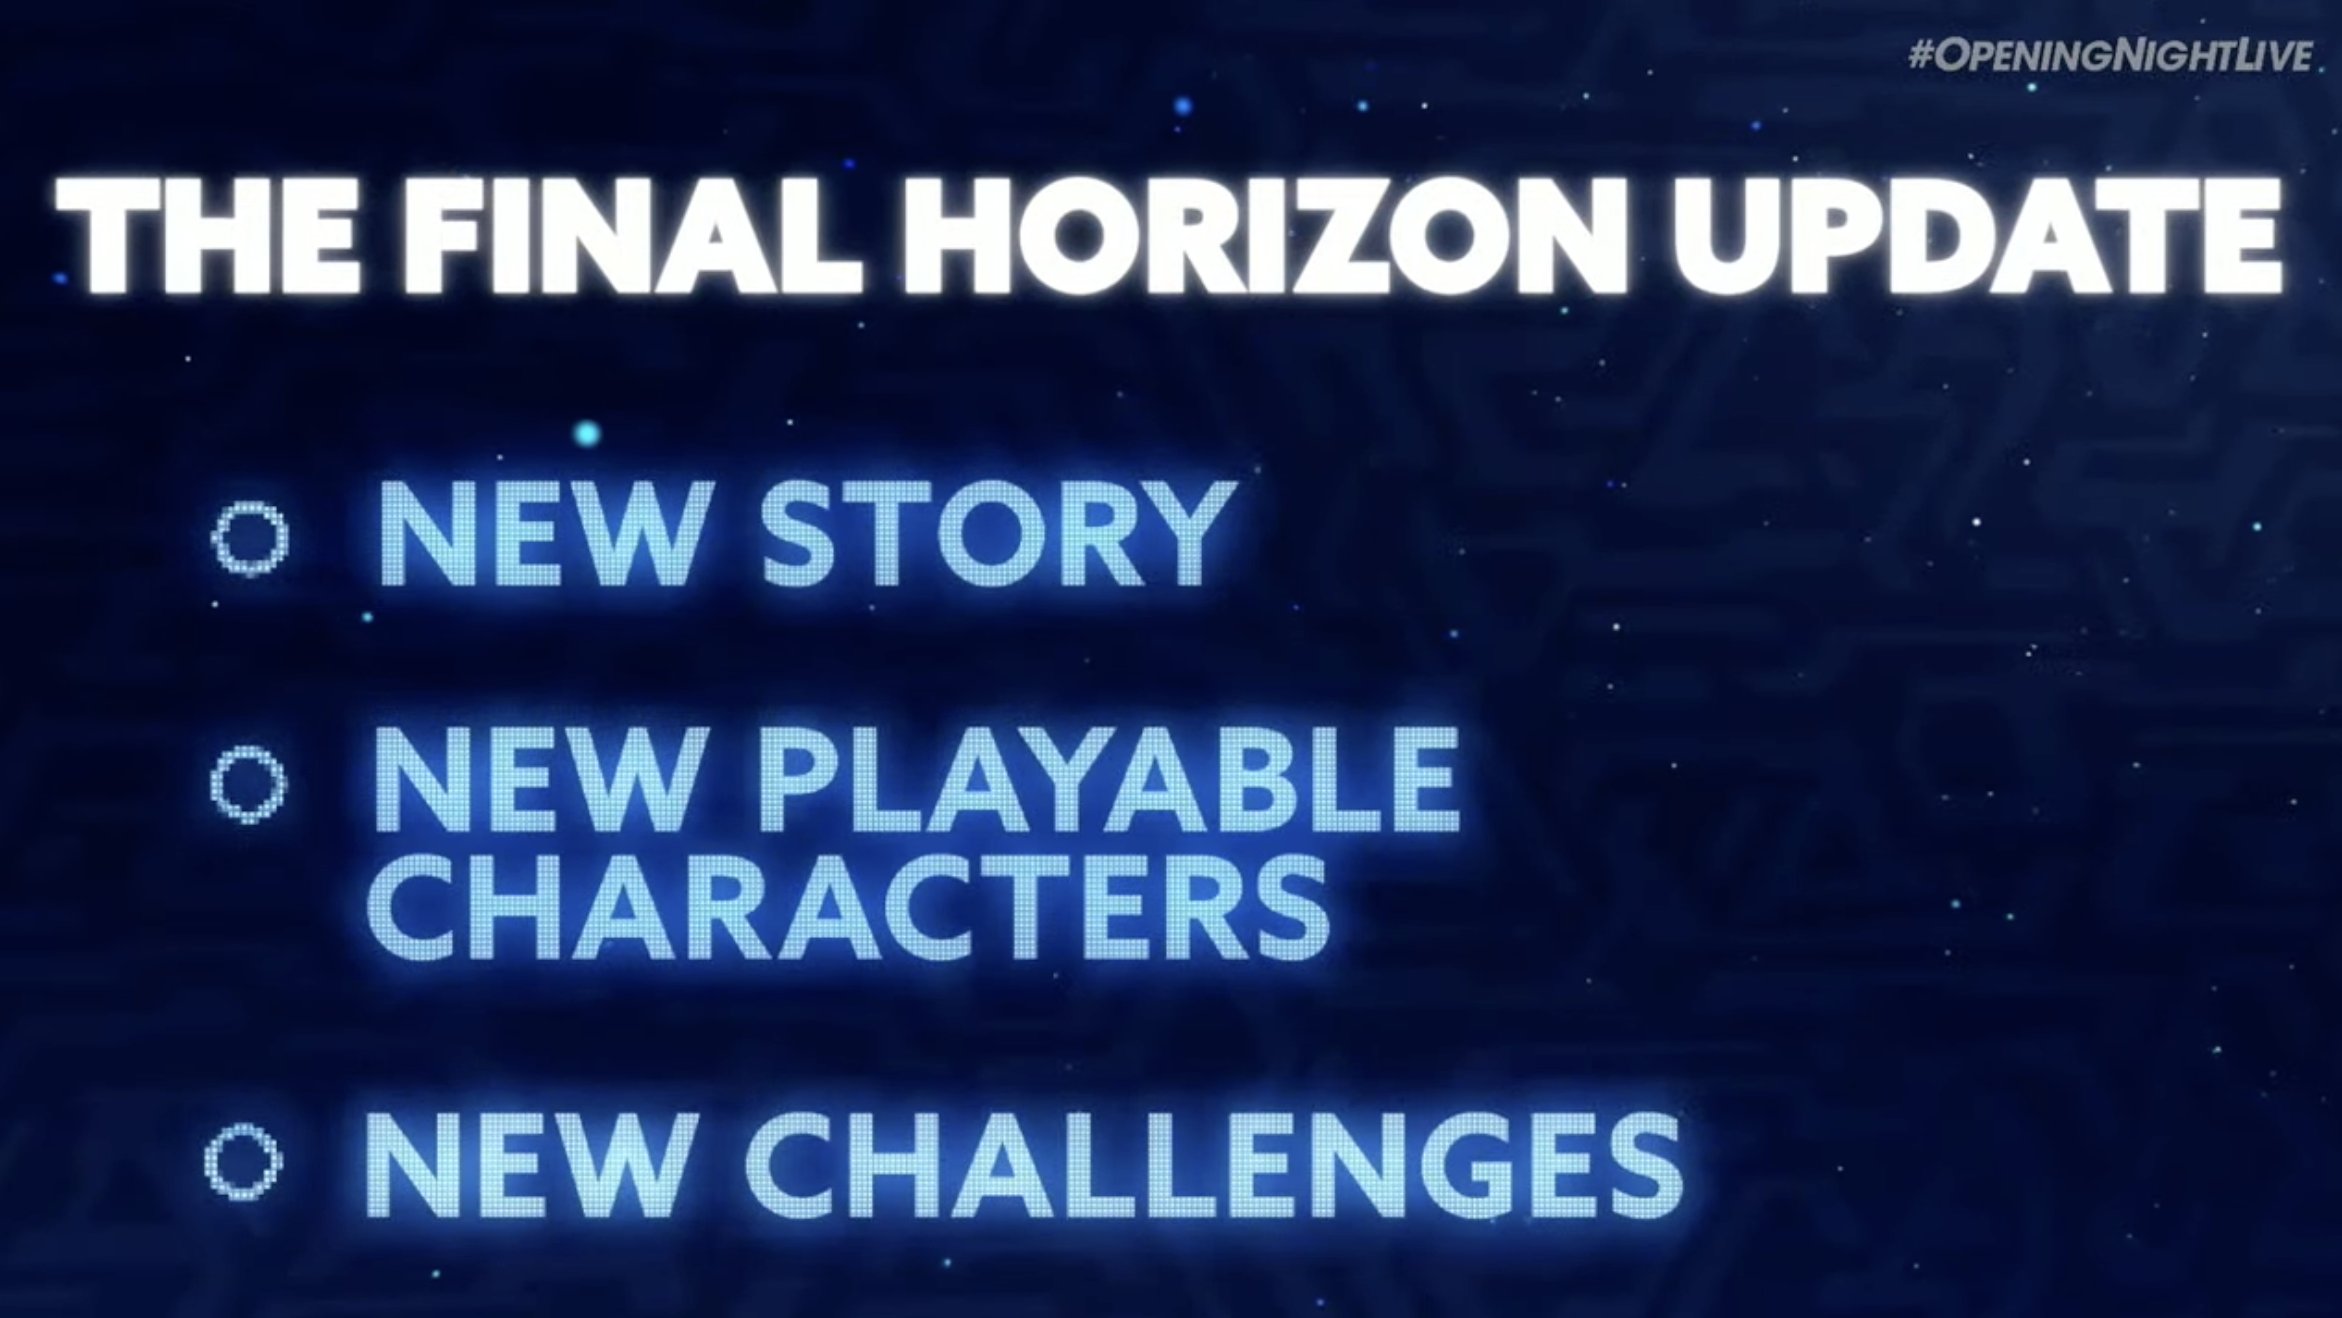 Sonic Frontiers: The Final Horizon Update Out Now